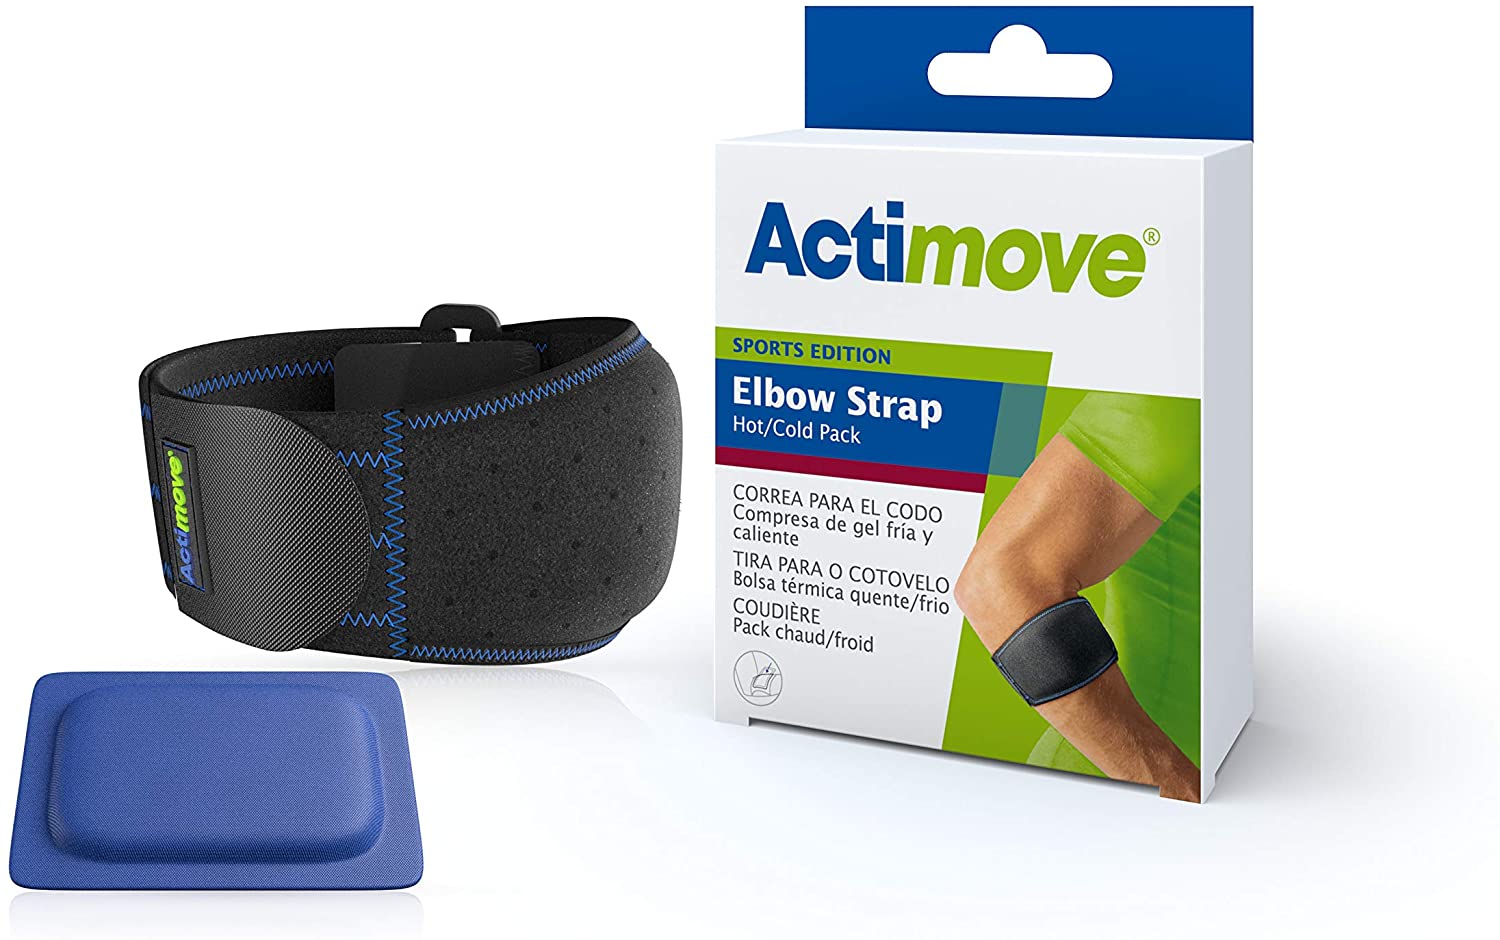 Comes with an air pack and a pump, allowing for various amounts of pressure, provides comfortable firm support to stiff or aching elbows.